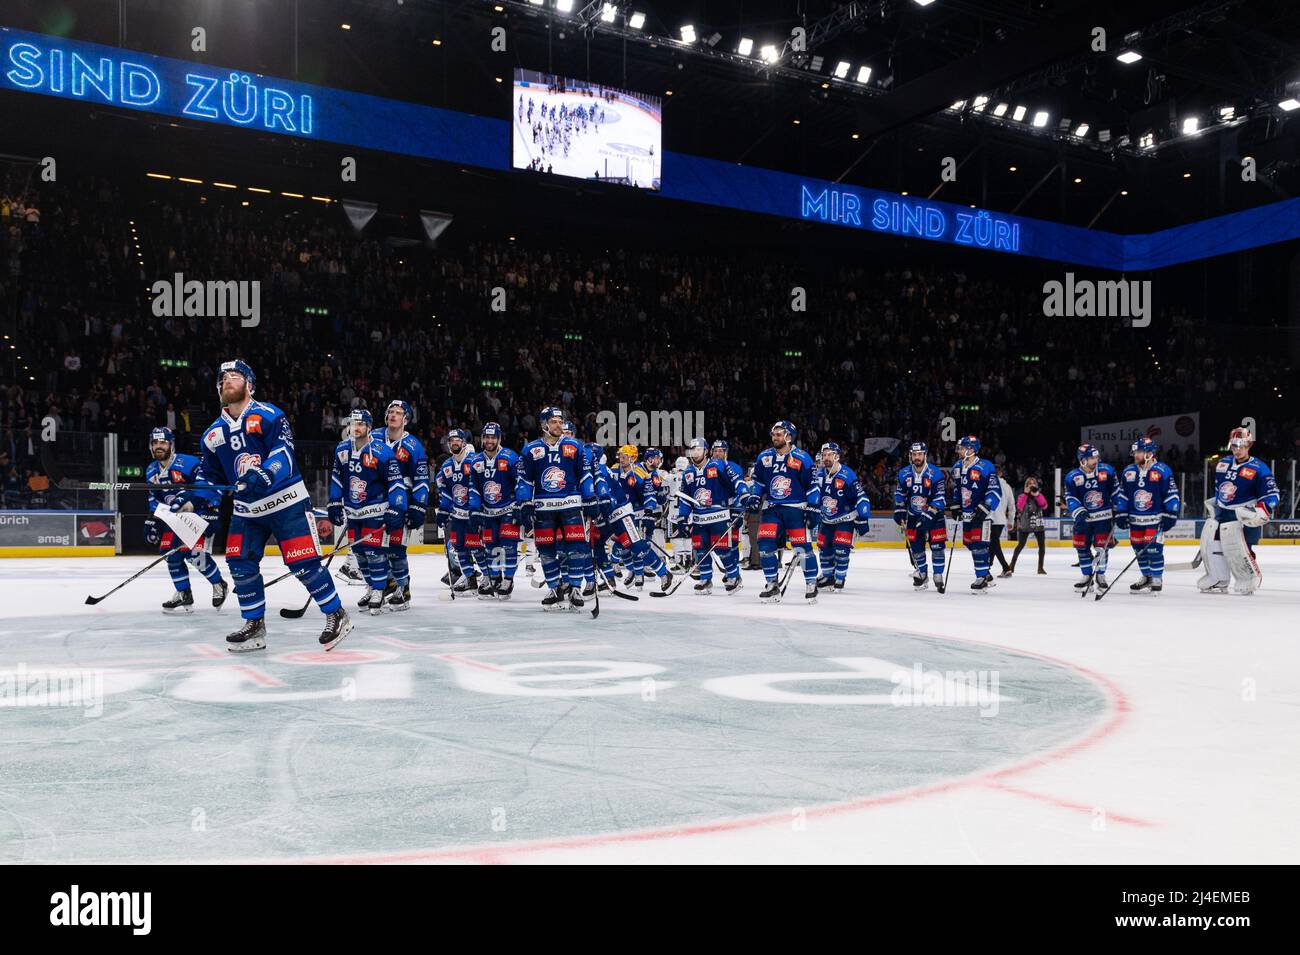 April 14, 2022, Zurich, Hallenstadion, Swiss National League: Semifinals  Game 4: ZSC Lions - Fribourg-Gotteron, #91 Denis Hollenstein (ZSC) shooting  at goal. (Photo by Markus Aeschimann/Just Pictures/Sipa USA Stock Photo -  Alamy